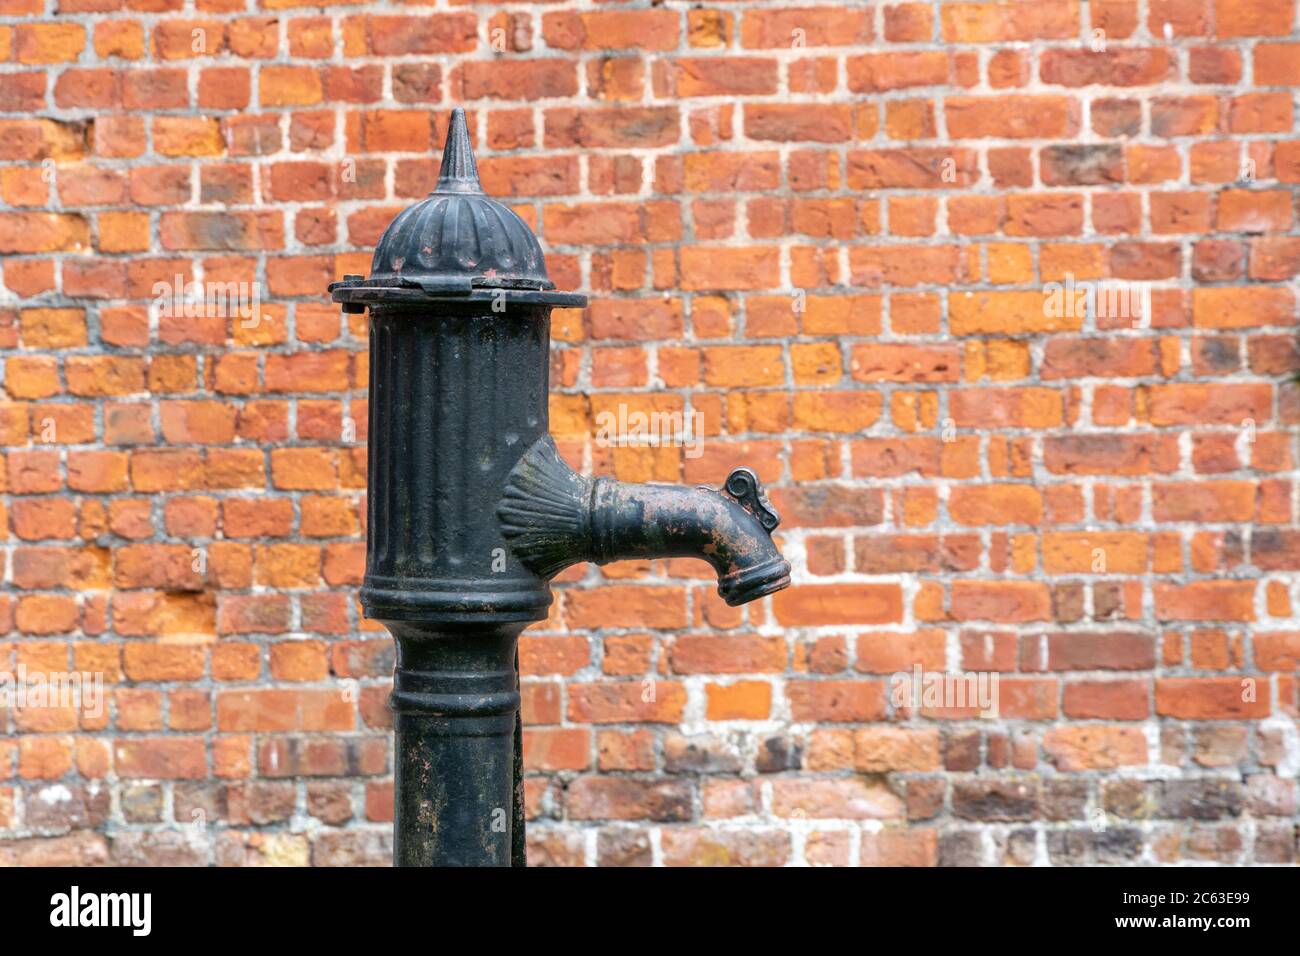 Cast Iron Water Pump High Resolution Stock Photography And Images Alamy